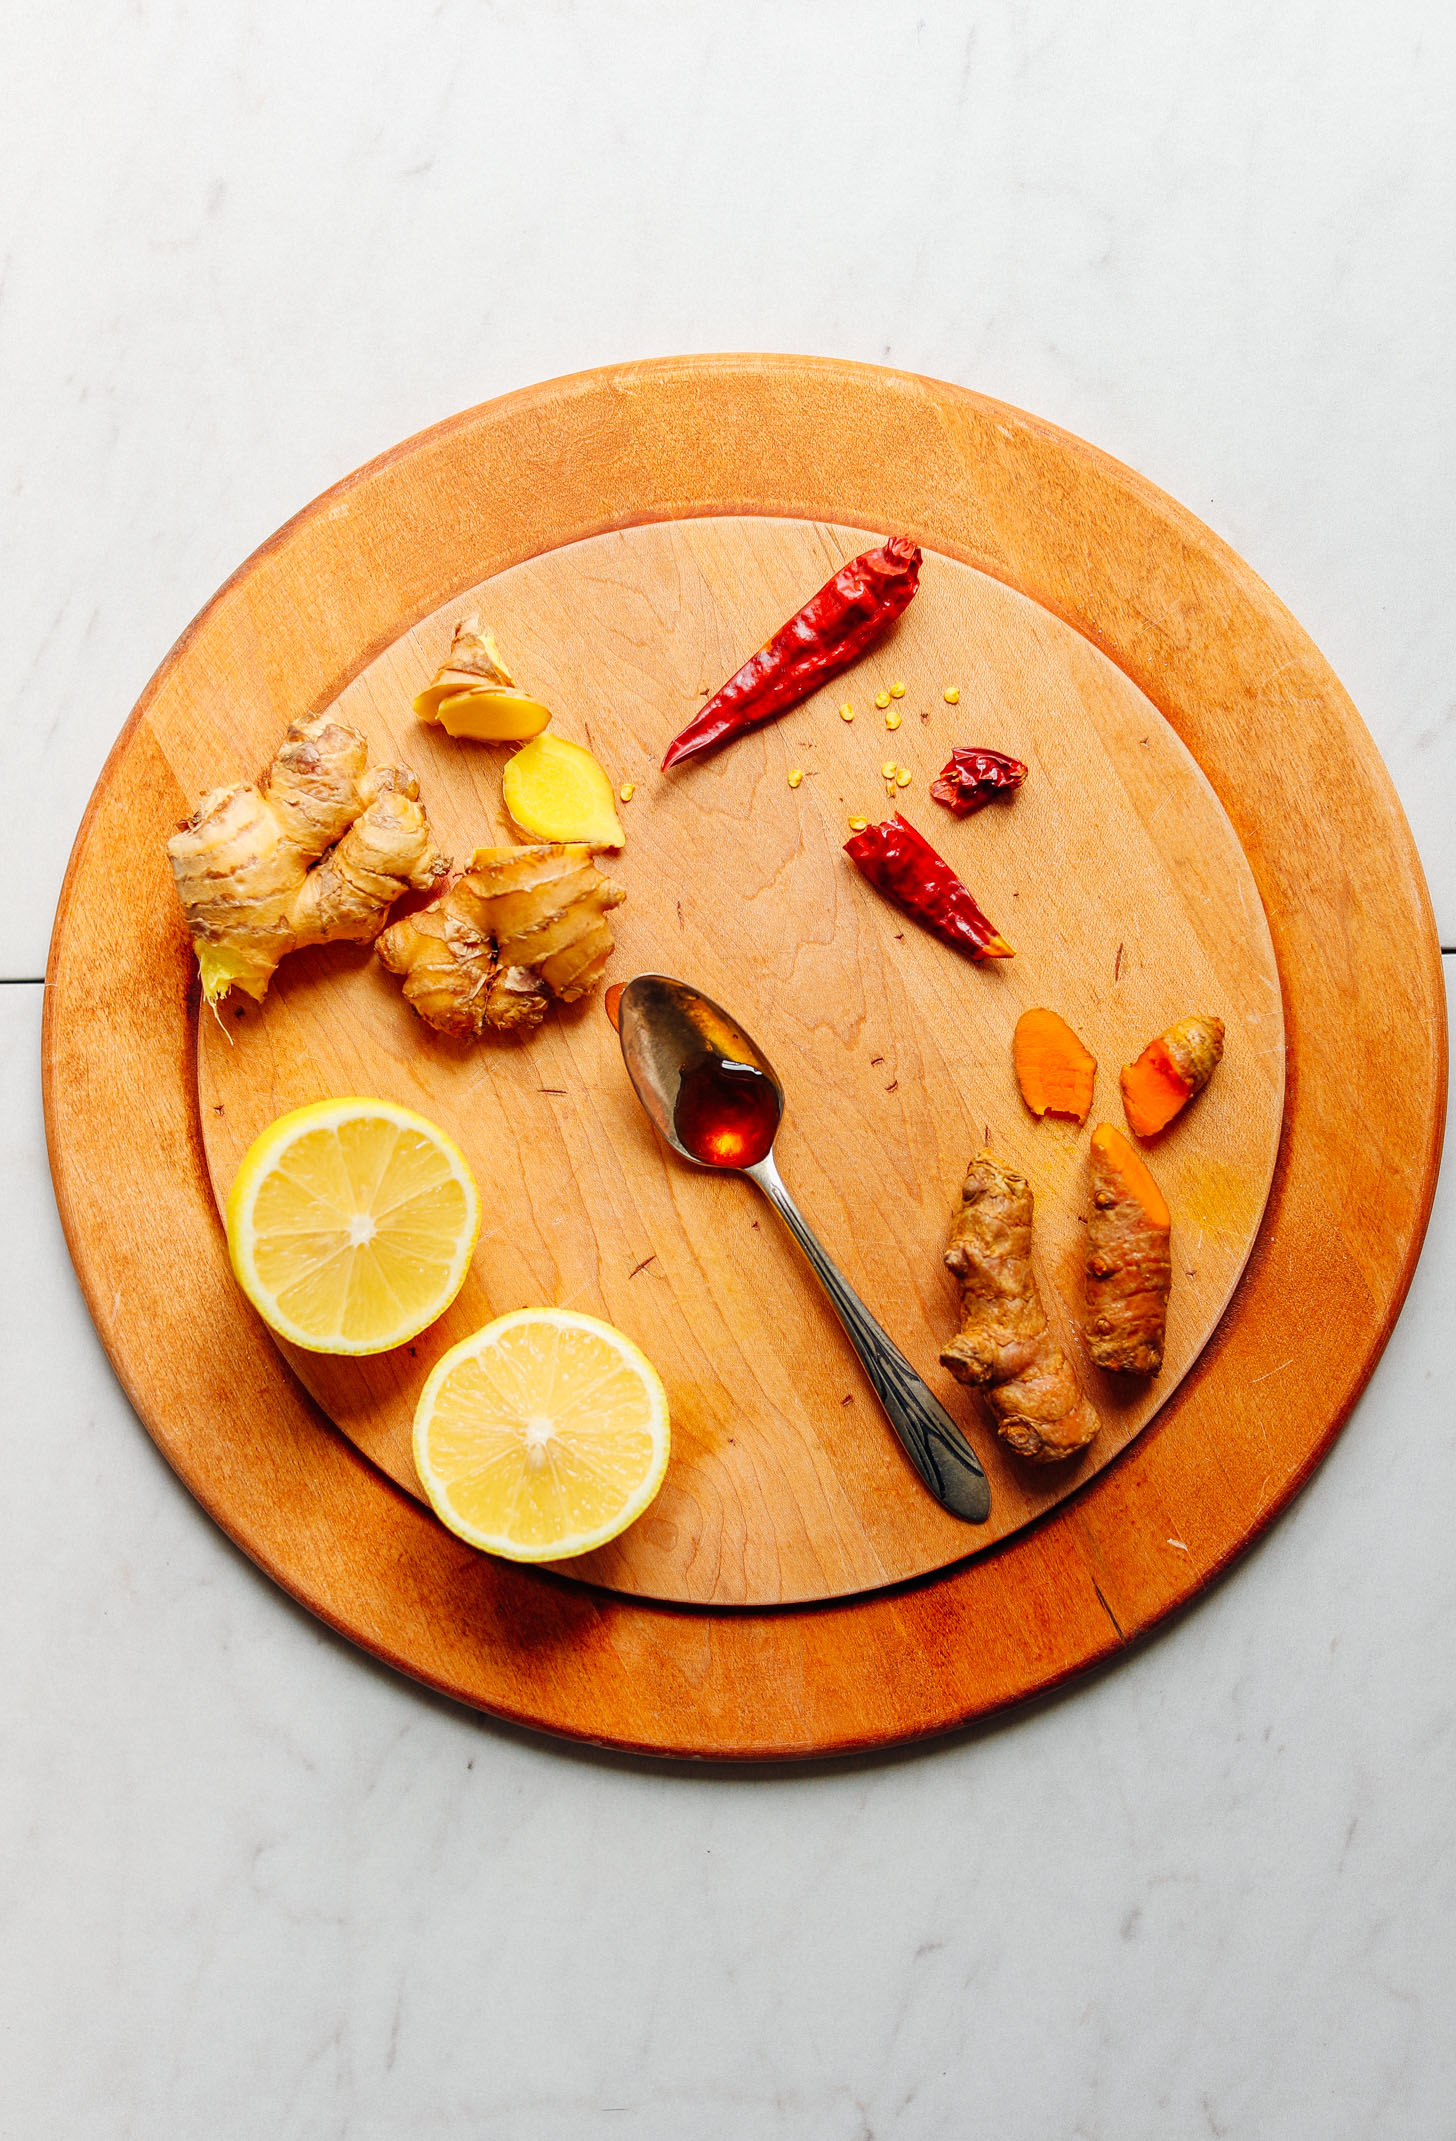 Wood cutting board with ingredients for making 3-Ingredient Turmeric Ginger TONIC